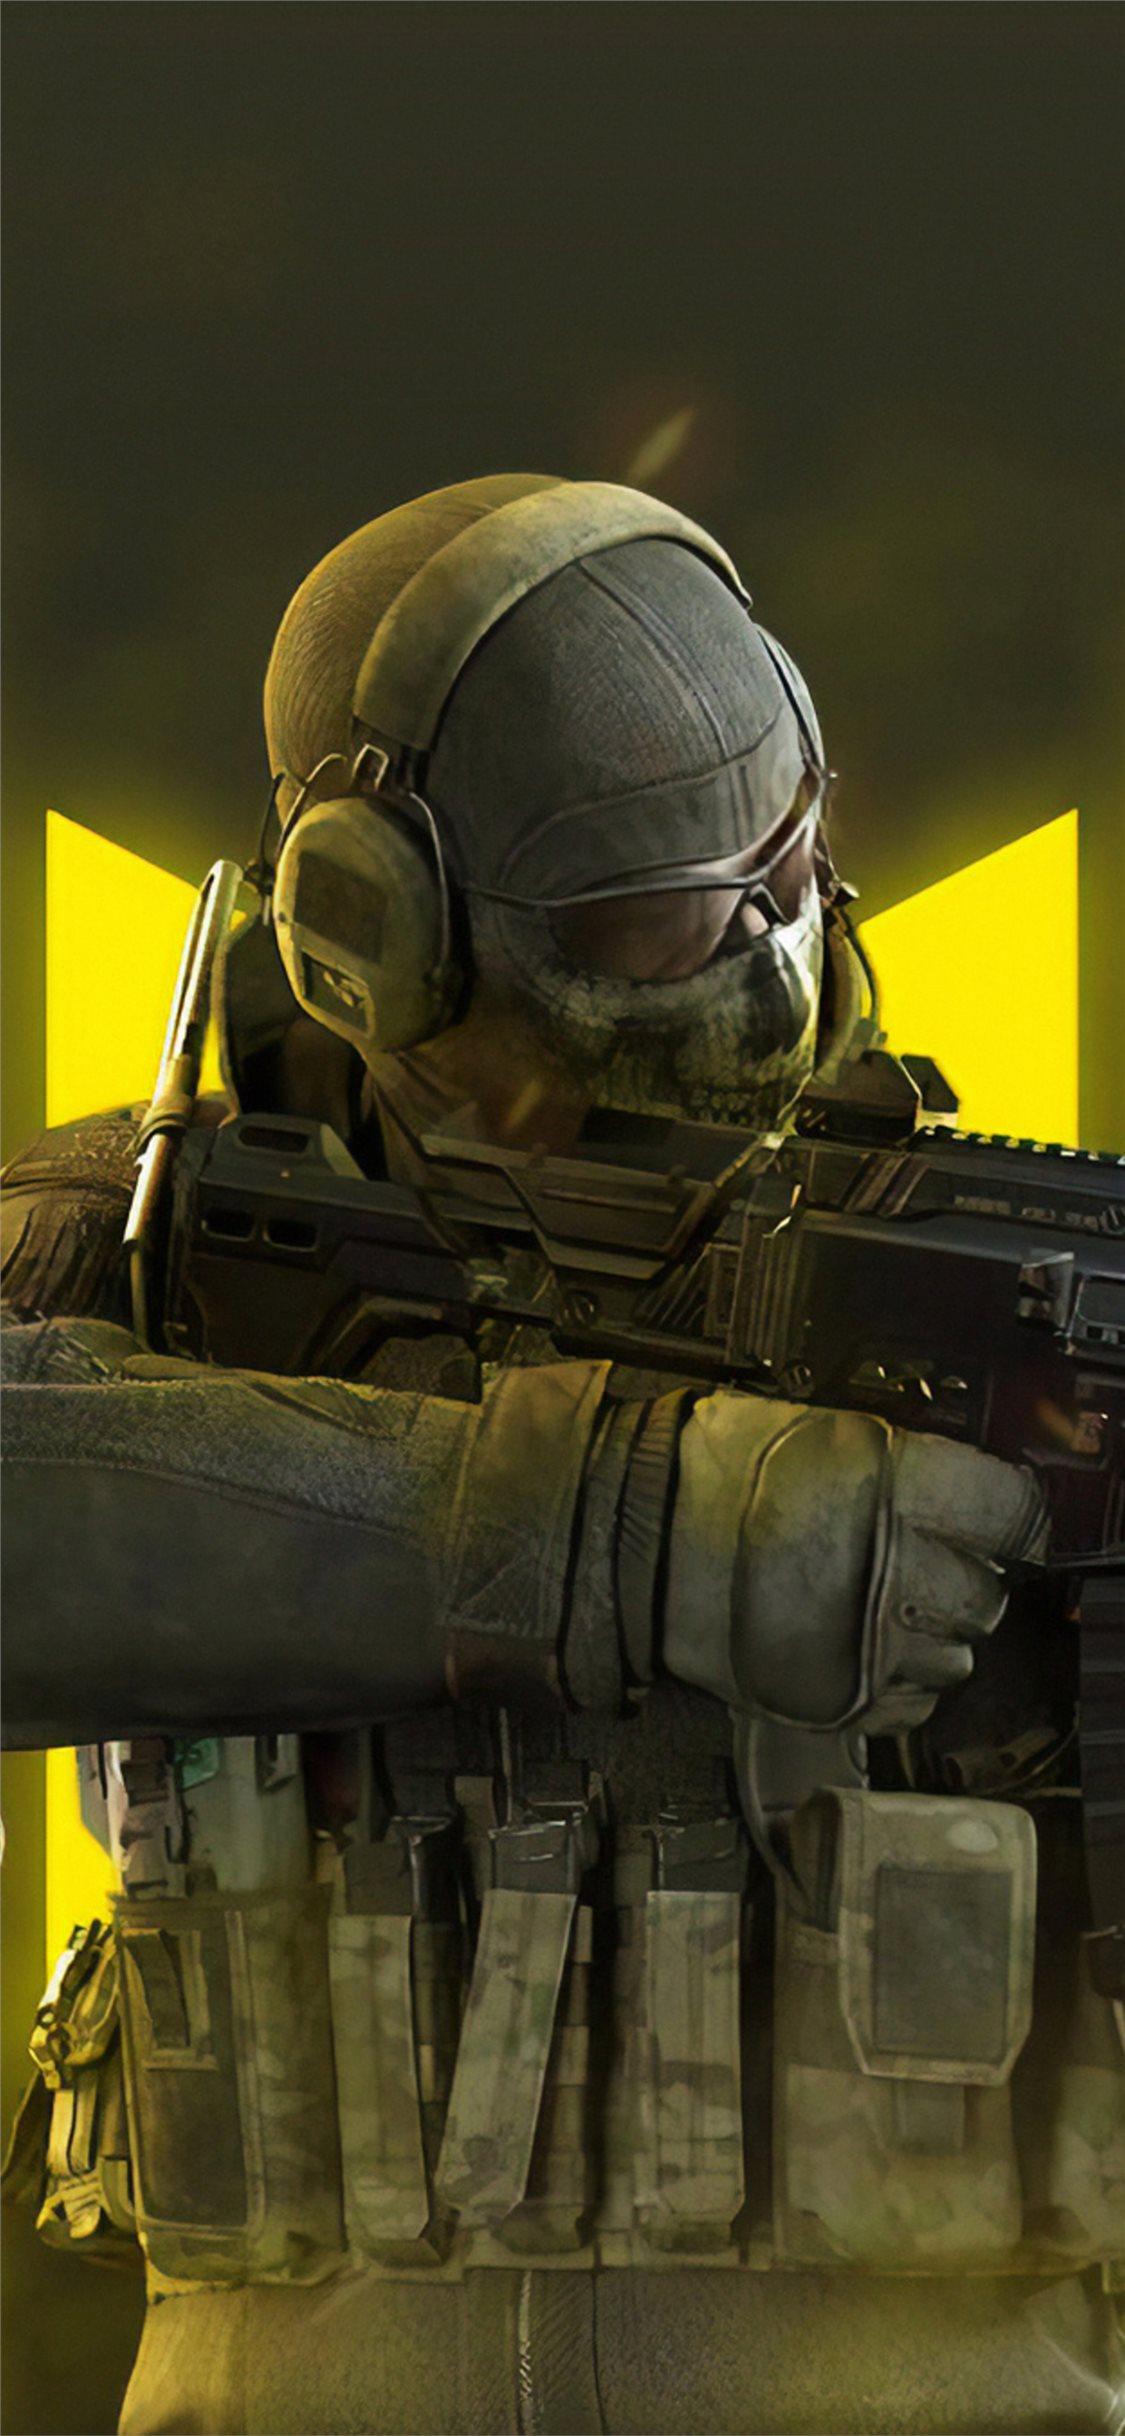 call of duty mobile 4k 2019 iPhone X Wallpaper Free Download